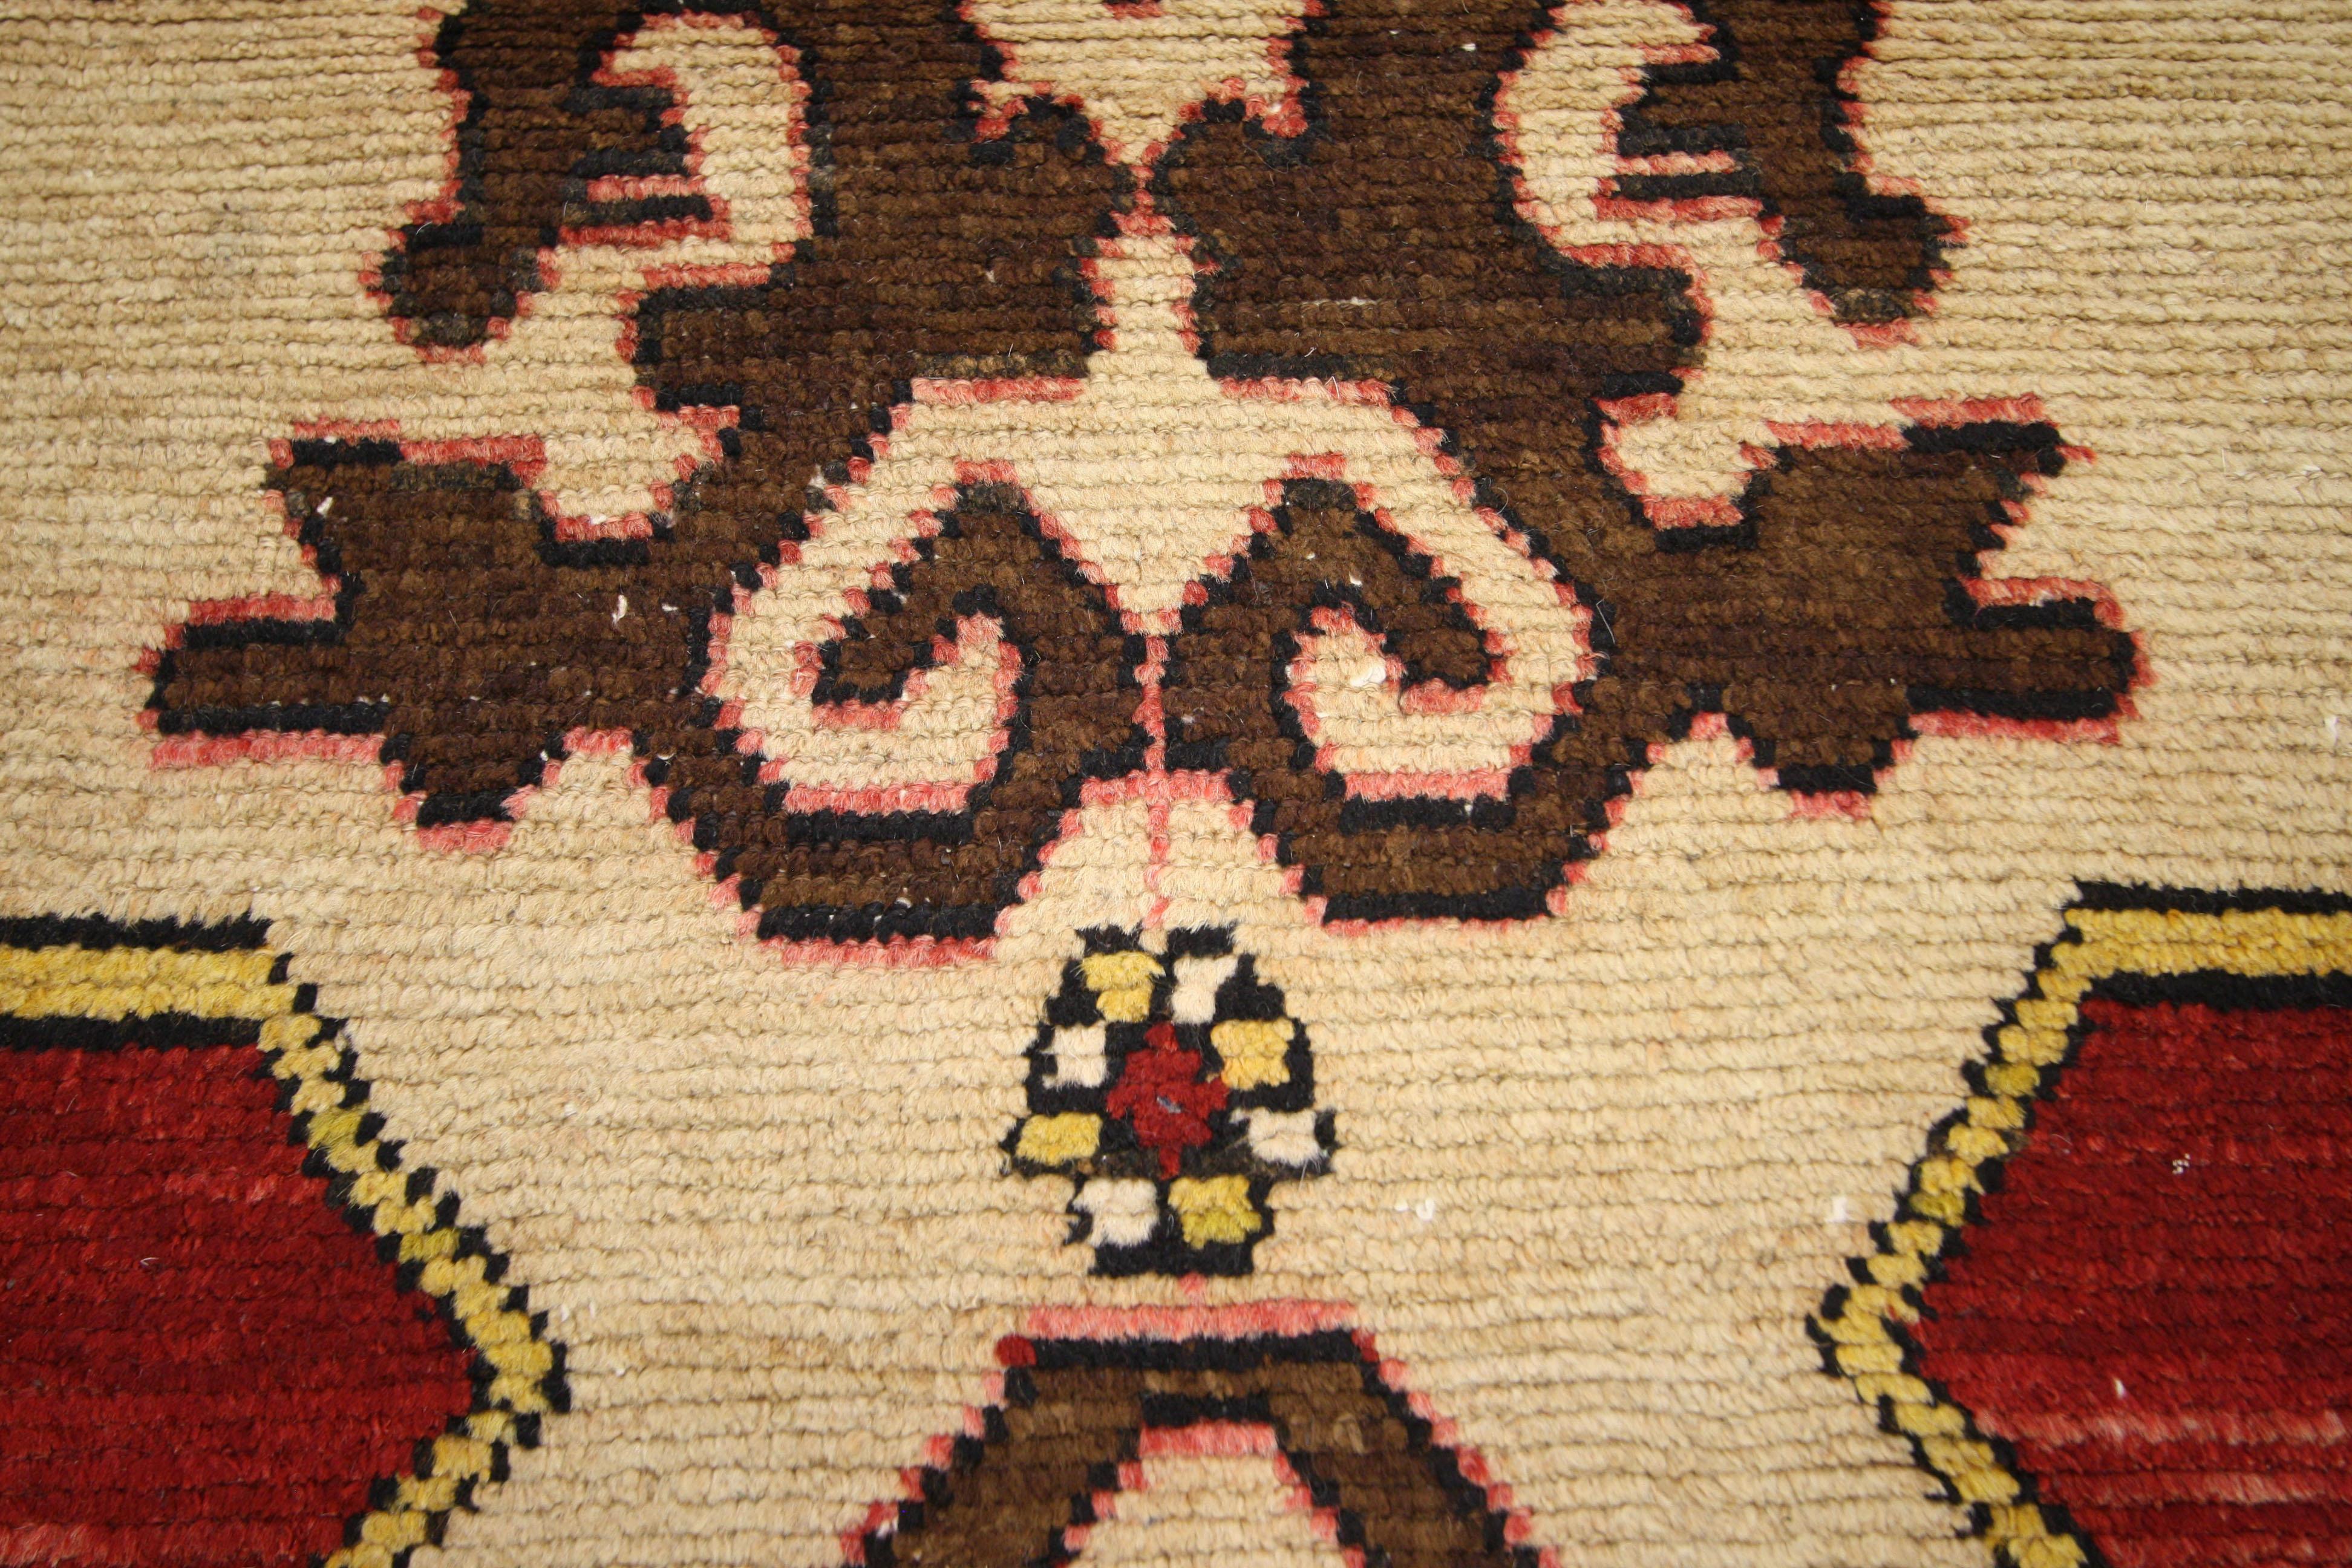 This vintage Turkish Oushak carpet runner with its traditional modern style and impeccable craftsmanship will heighten a room’s sense of place in history. The warm brown border and jewel-tone red field enclose a large-scale medallion with stylized